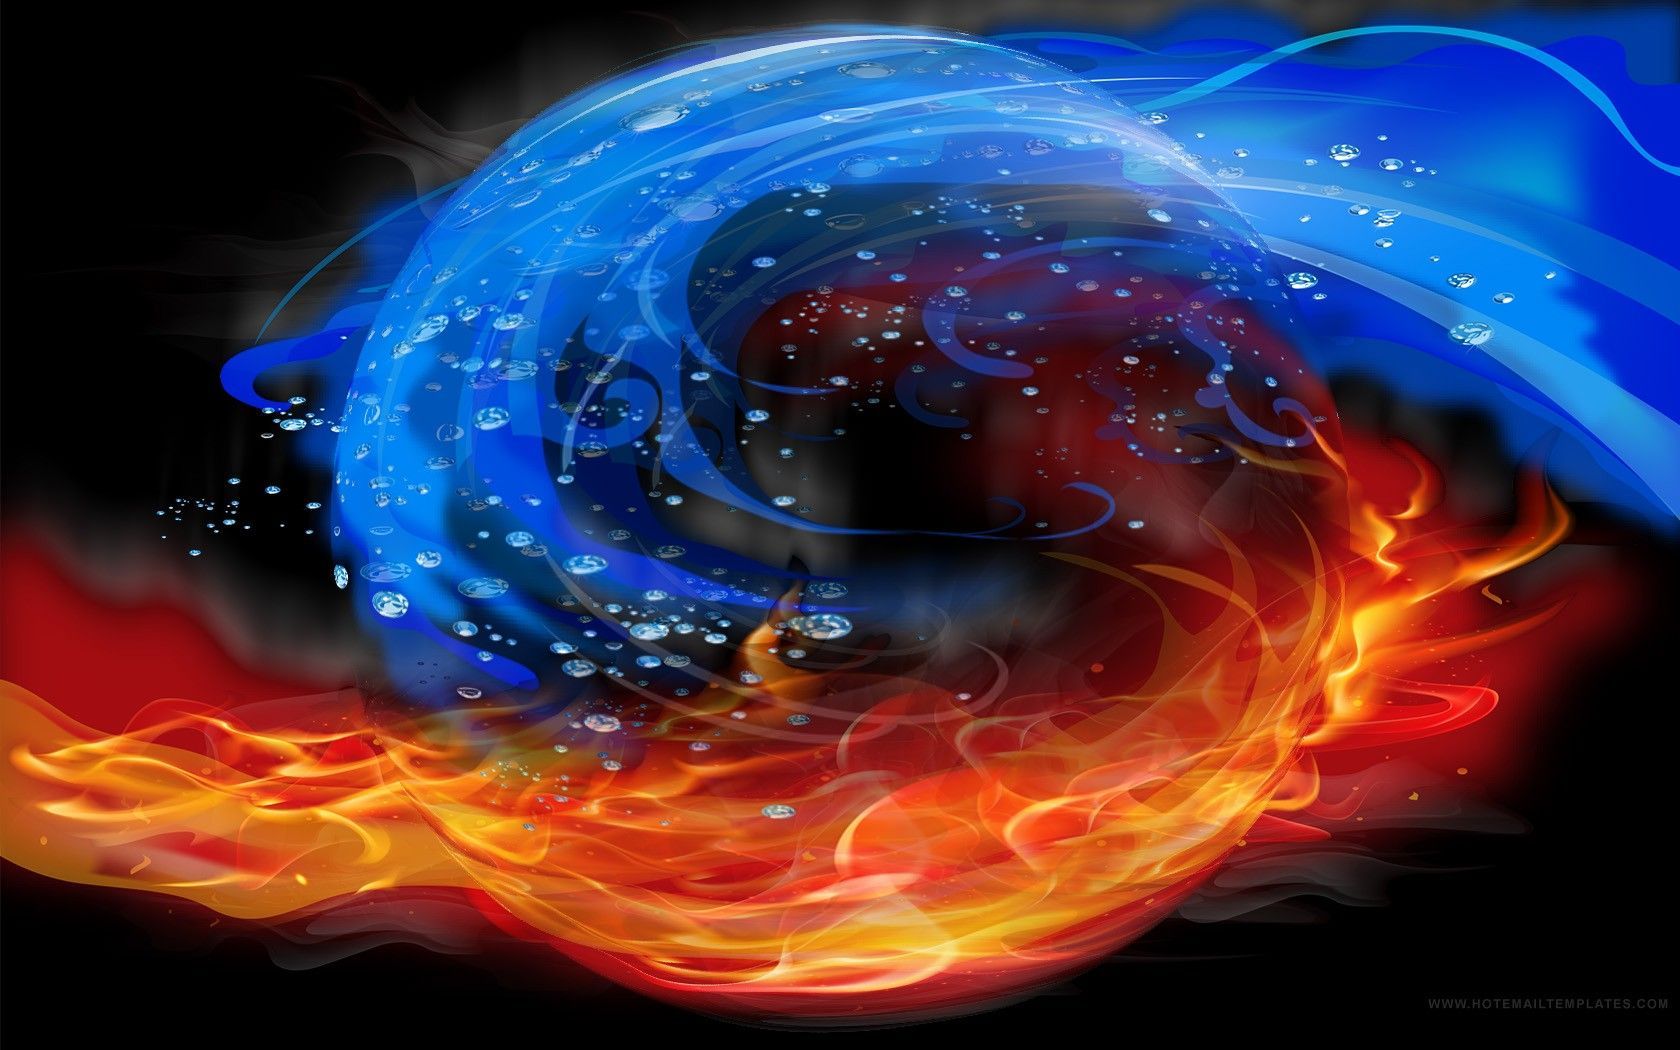 Fire And Water wallpaper Android Apps on Google Play. Fire and ice wallpaper, Fire and ice, Water